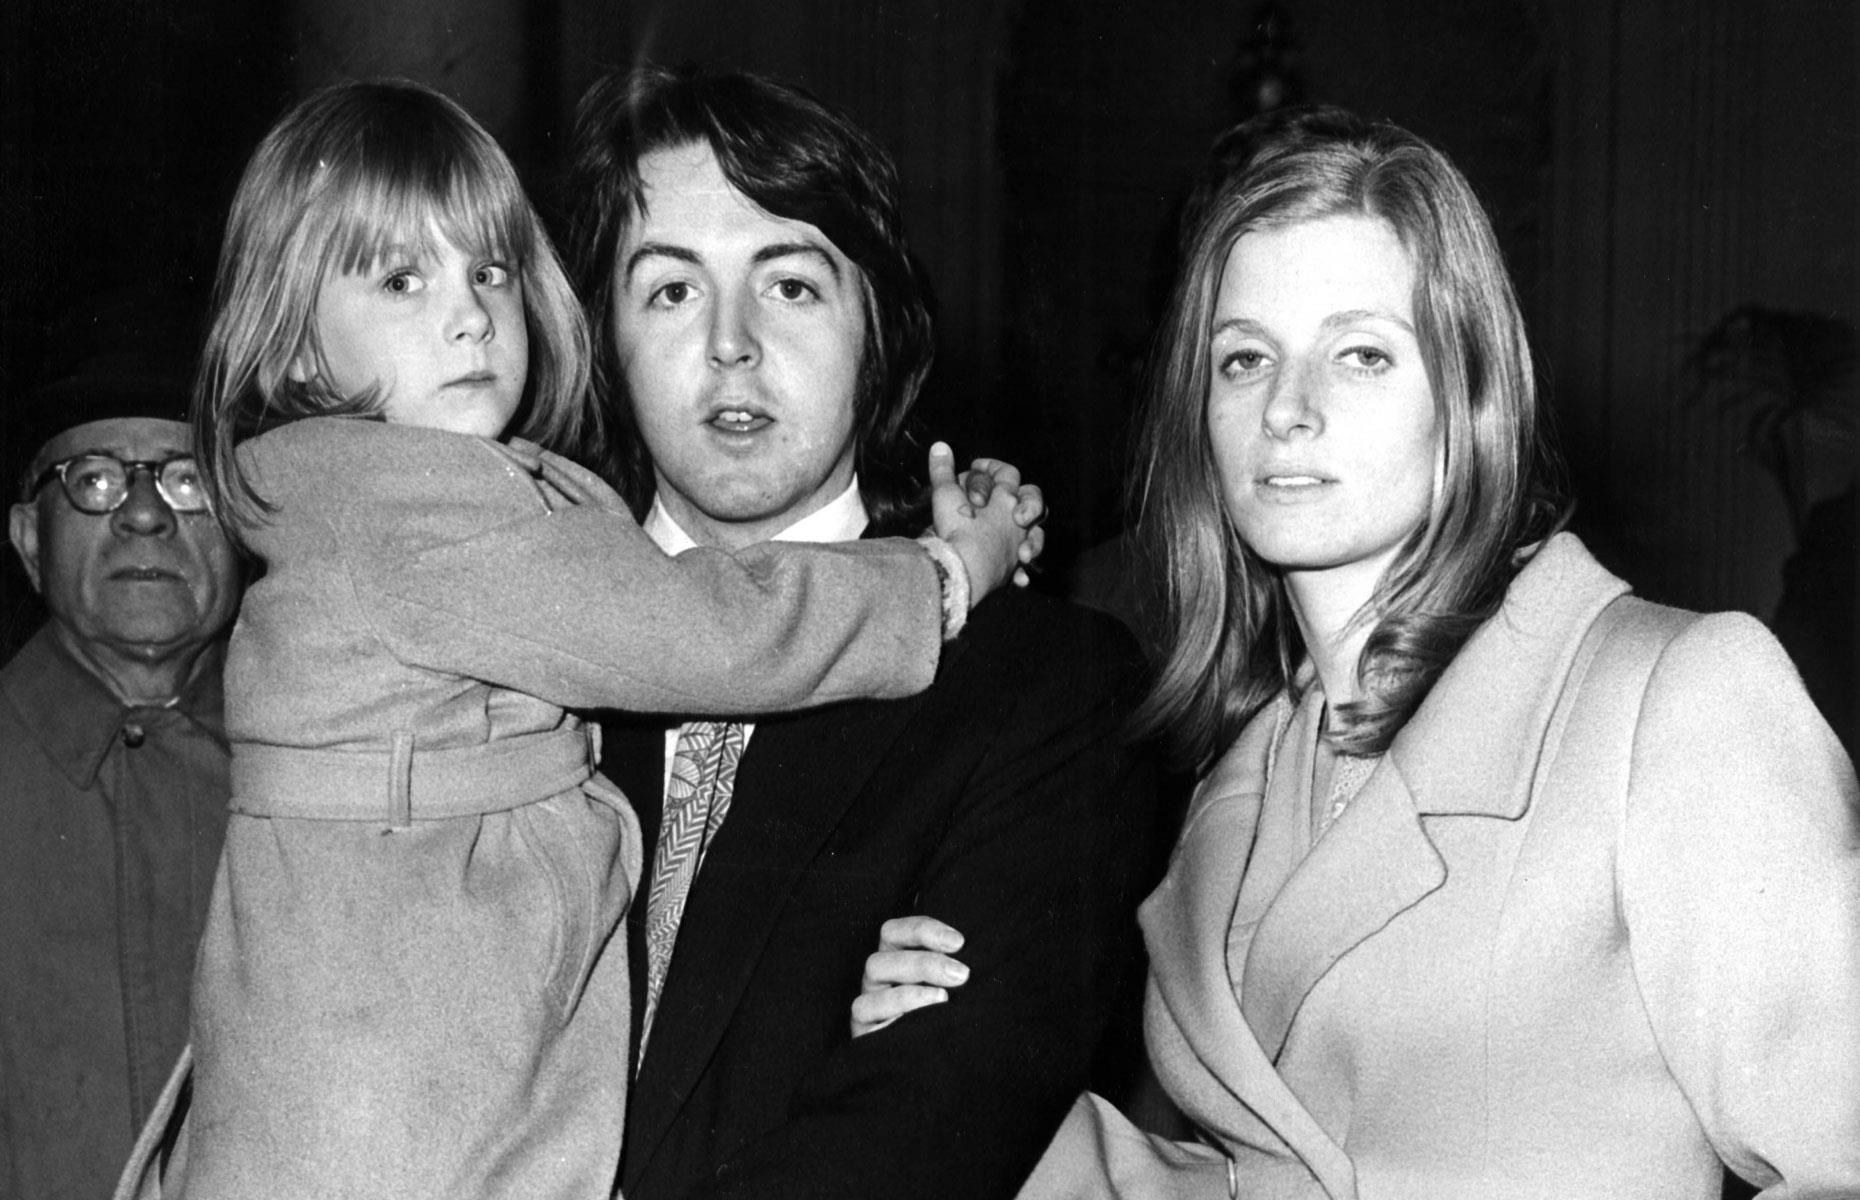 <p>Born to Sir Paul McCartney's first wife Linda Eastman and her first husband Joseph Melville See Jr. in 1962, Heather McCartney was legally adopted by Paul in 1969, the year he married her mother.</p>  <p>Heather went on to forge a career as a potter and launched an eponymous homeware collection in 1999. Like her parents and siblings, she's a vegetarian and a passionate animal rights activist. </p>